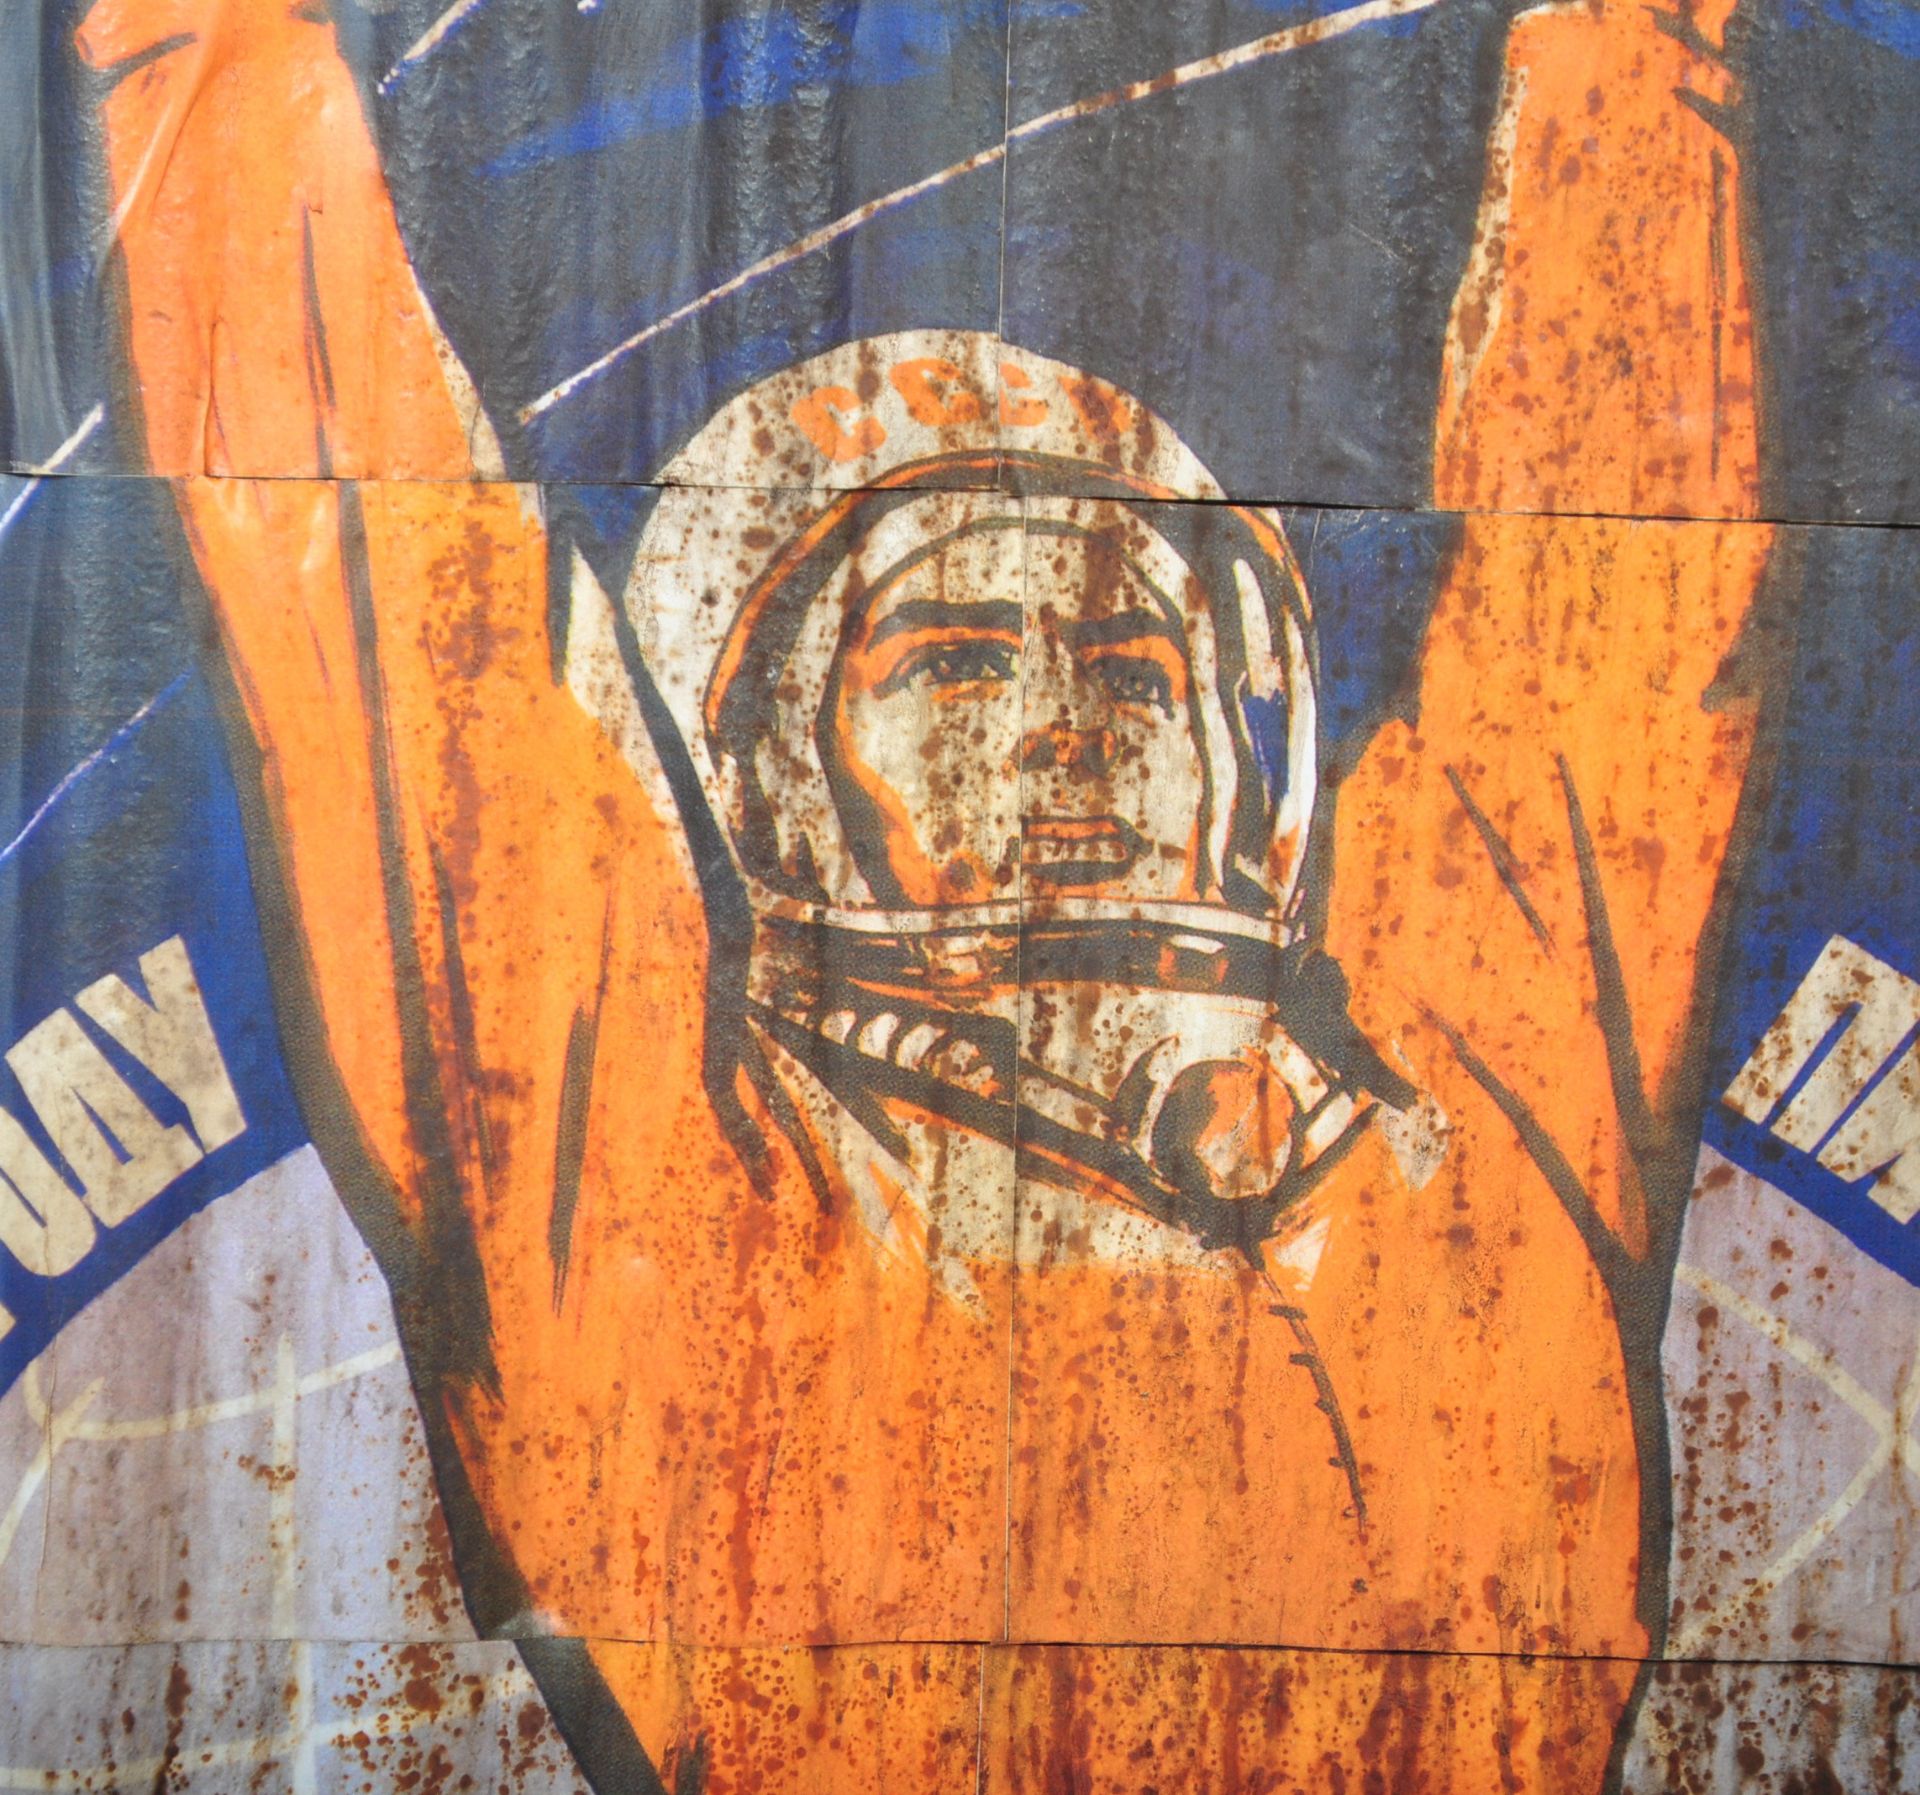 RUSSIAN SPACE RACE PROPAGANDA POSTER MOUNTED ONTO A METAL PANEL - Image 5 of 5